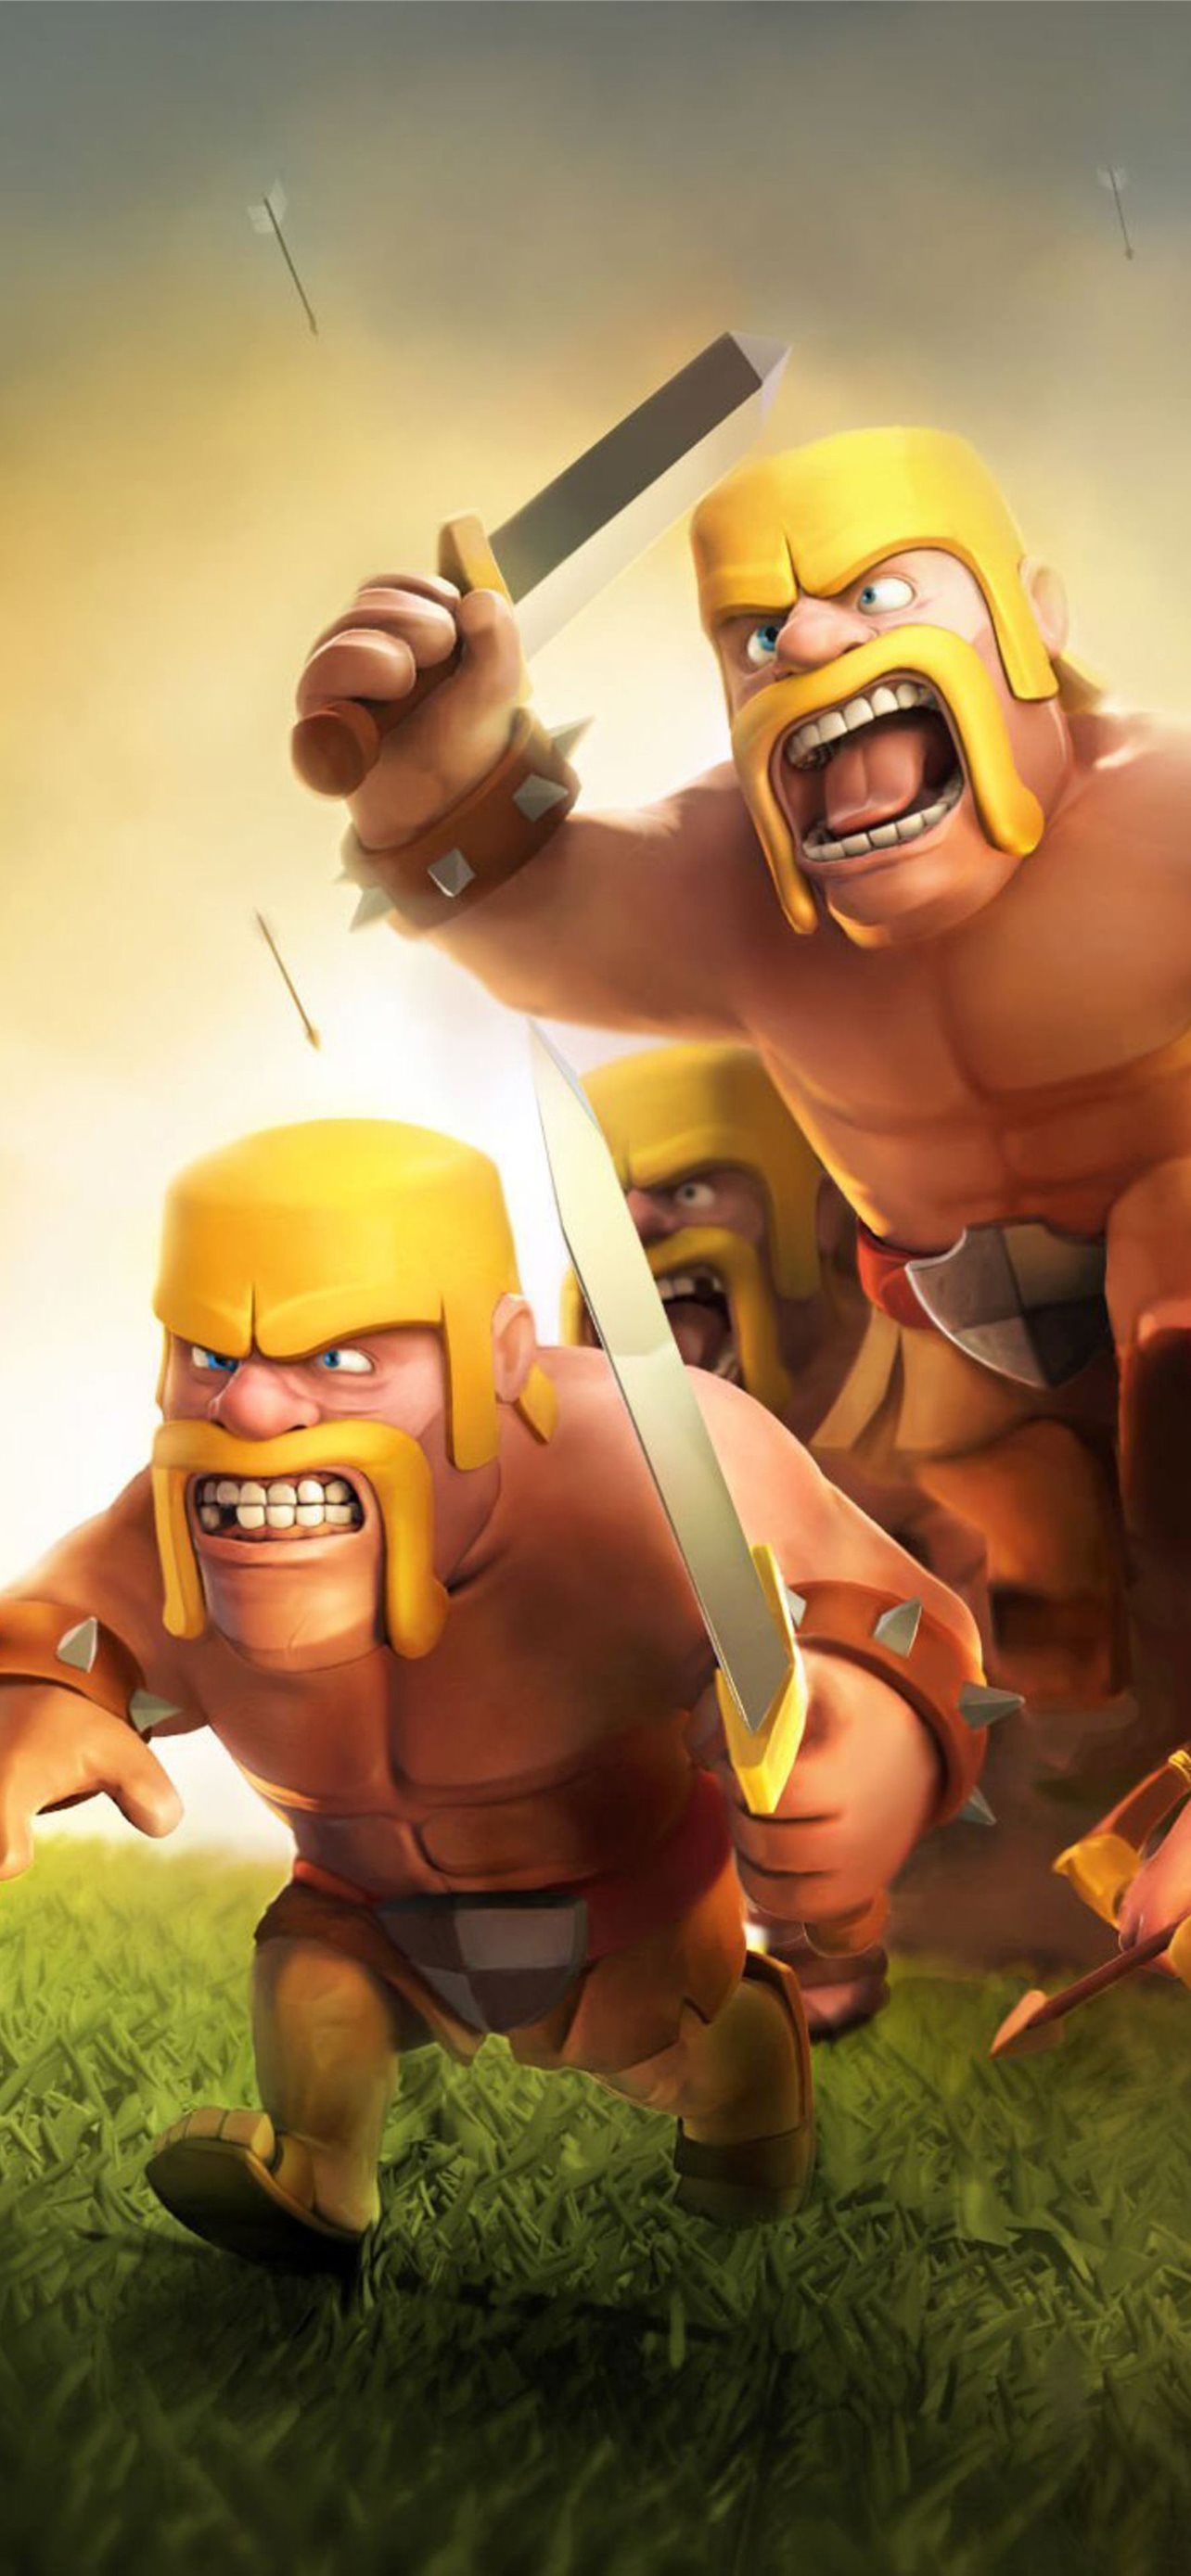 Misc Clash Of Clans HD hd 4k background for androi... iPhone Wallpapers  Free Download